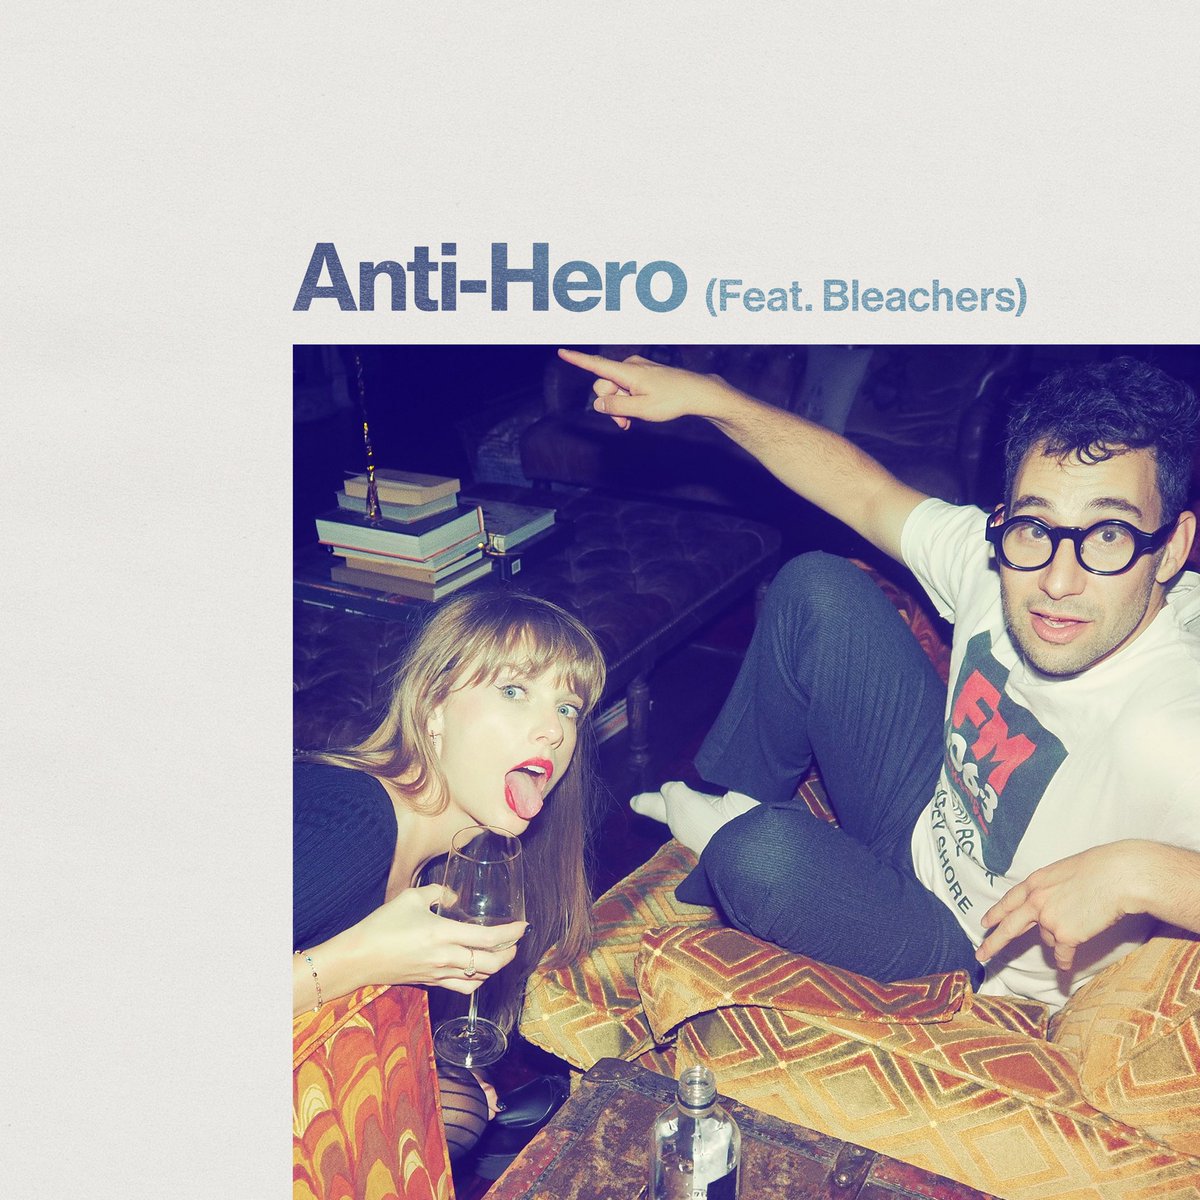 Jack’s version of ‘sexy baby’ is ‘art bro’ and we sincerely hope it confuses just as many people. Download Anti Hero featuring @bleachersmusic now at store.taylorswift.com